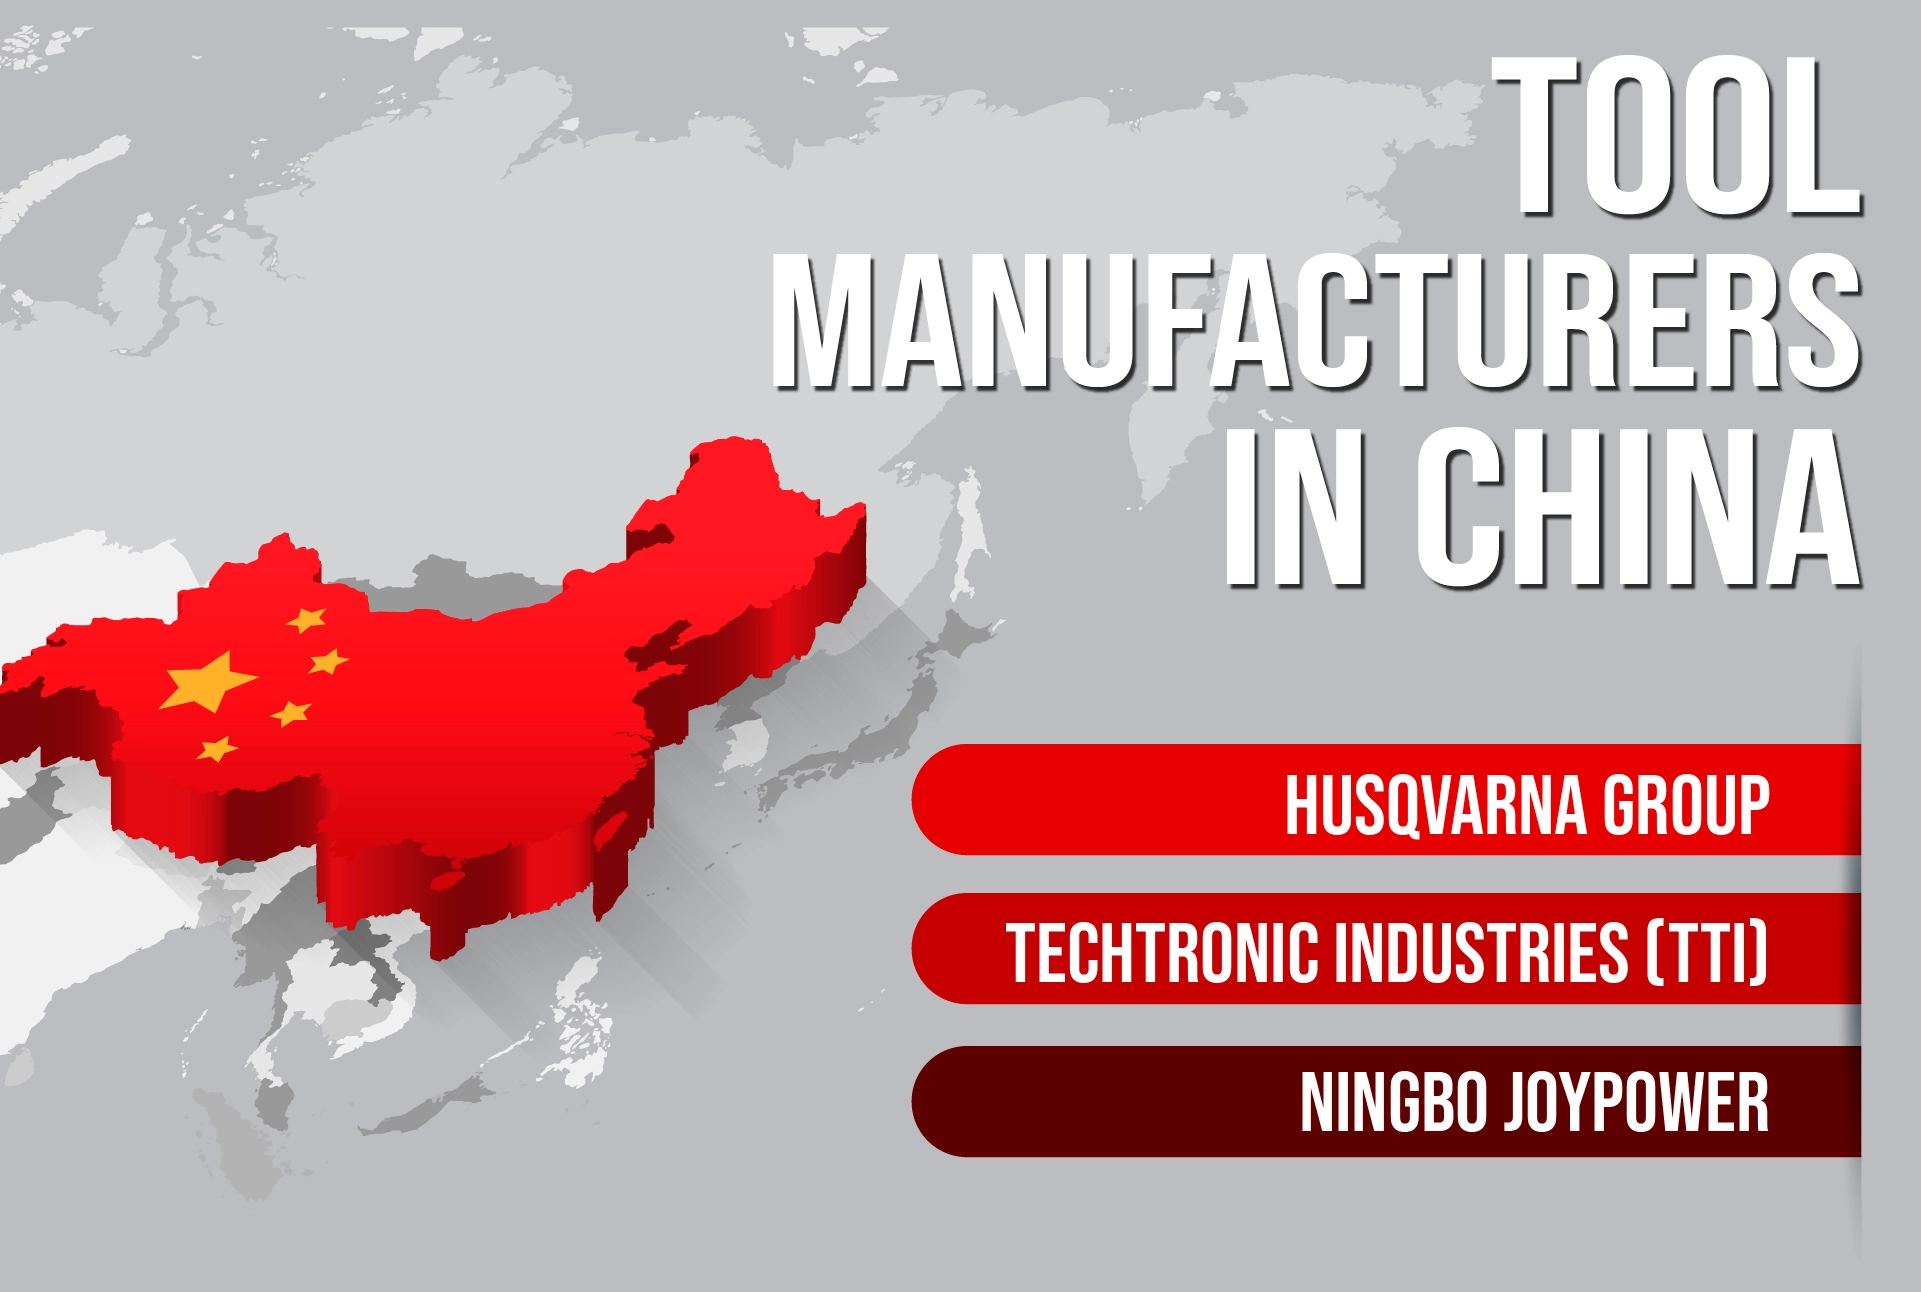 Tool Manufacturers in China